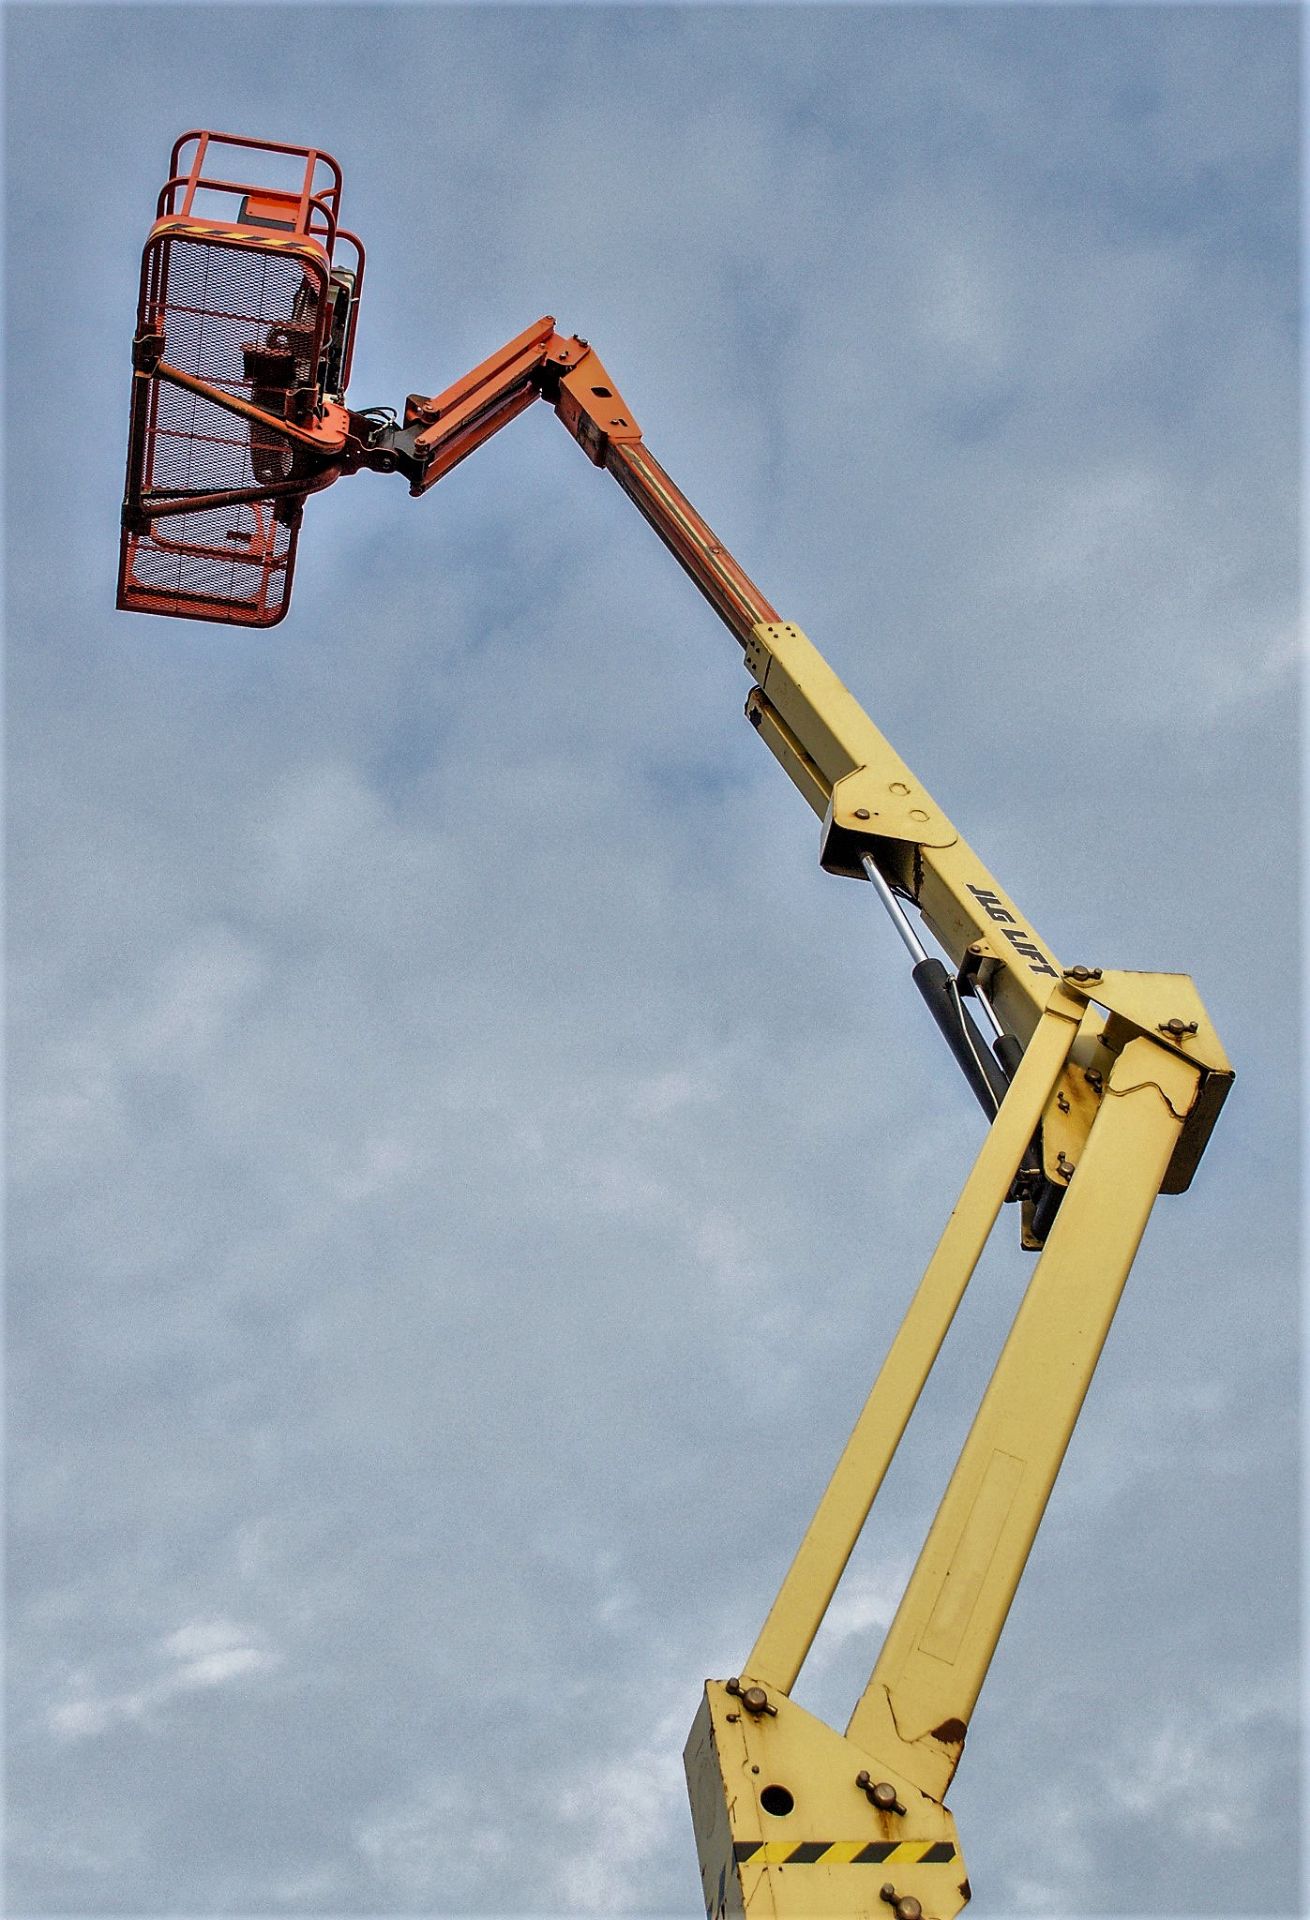 JLG 450AJ diesel driven rough terrain articulated boom access platform Year: 2007 S/N: 5190 Recorded - Image 10 of 17